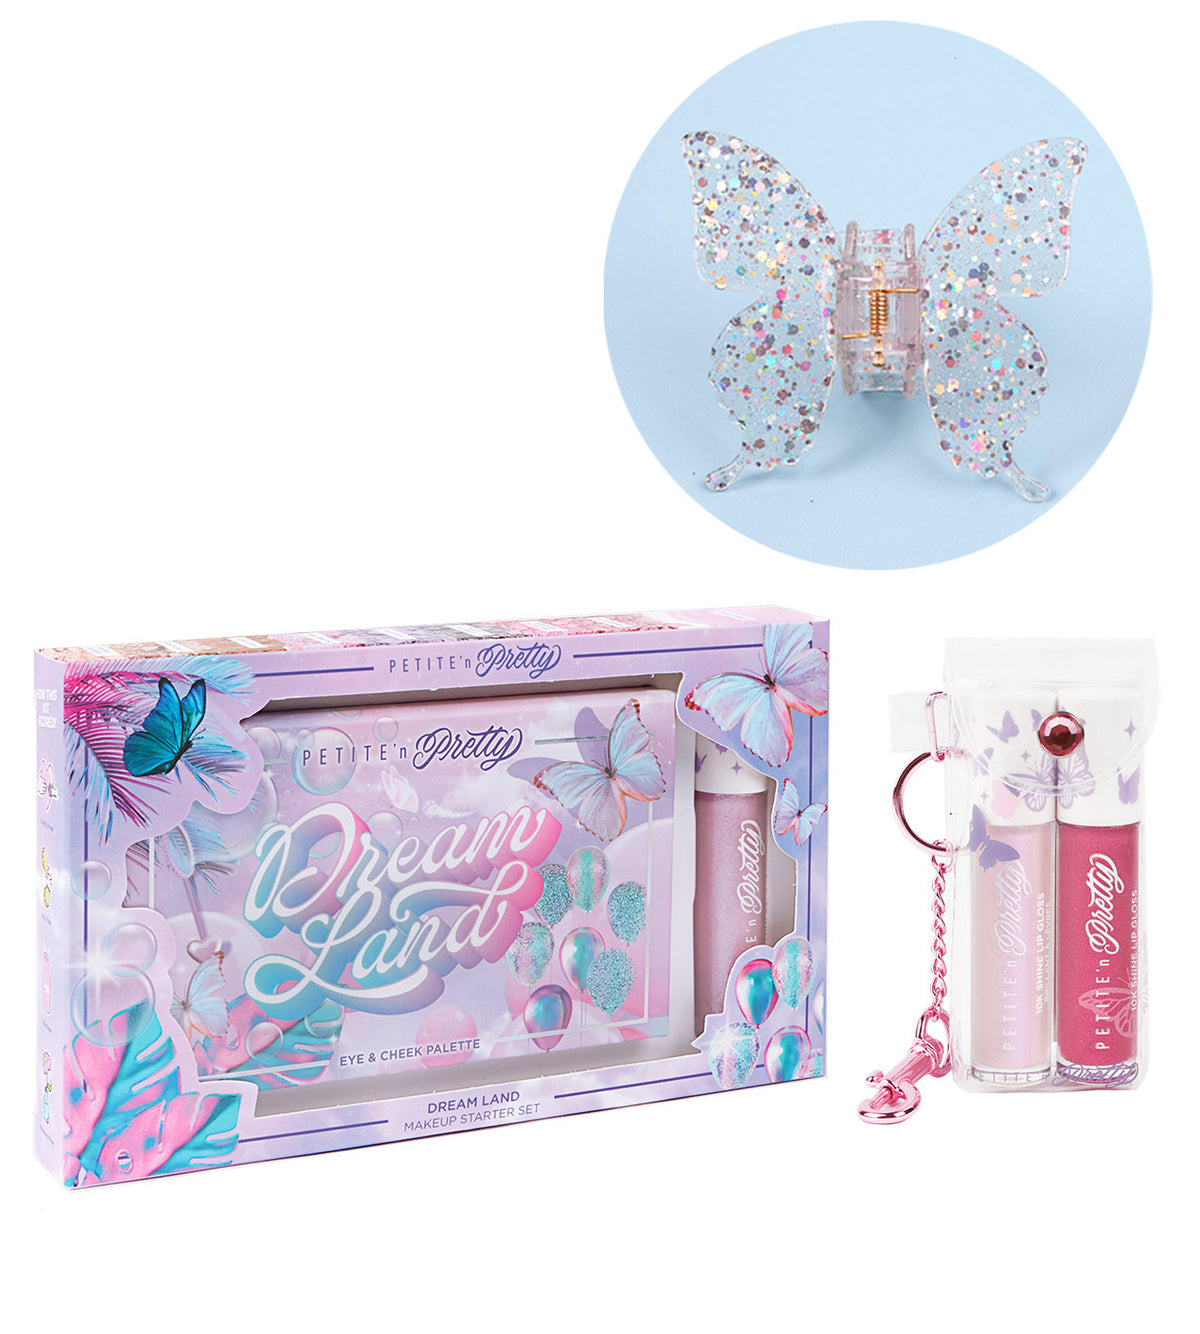 Dream Land Gift Set + FREE Butterfly Hair Clip